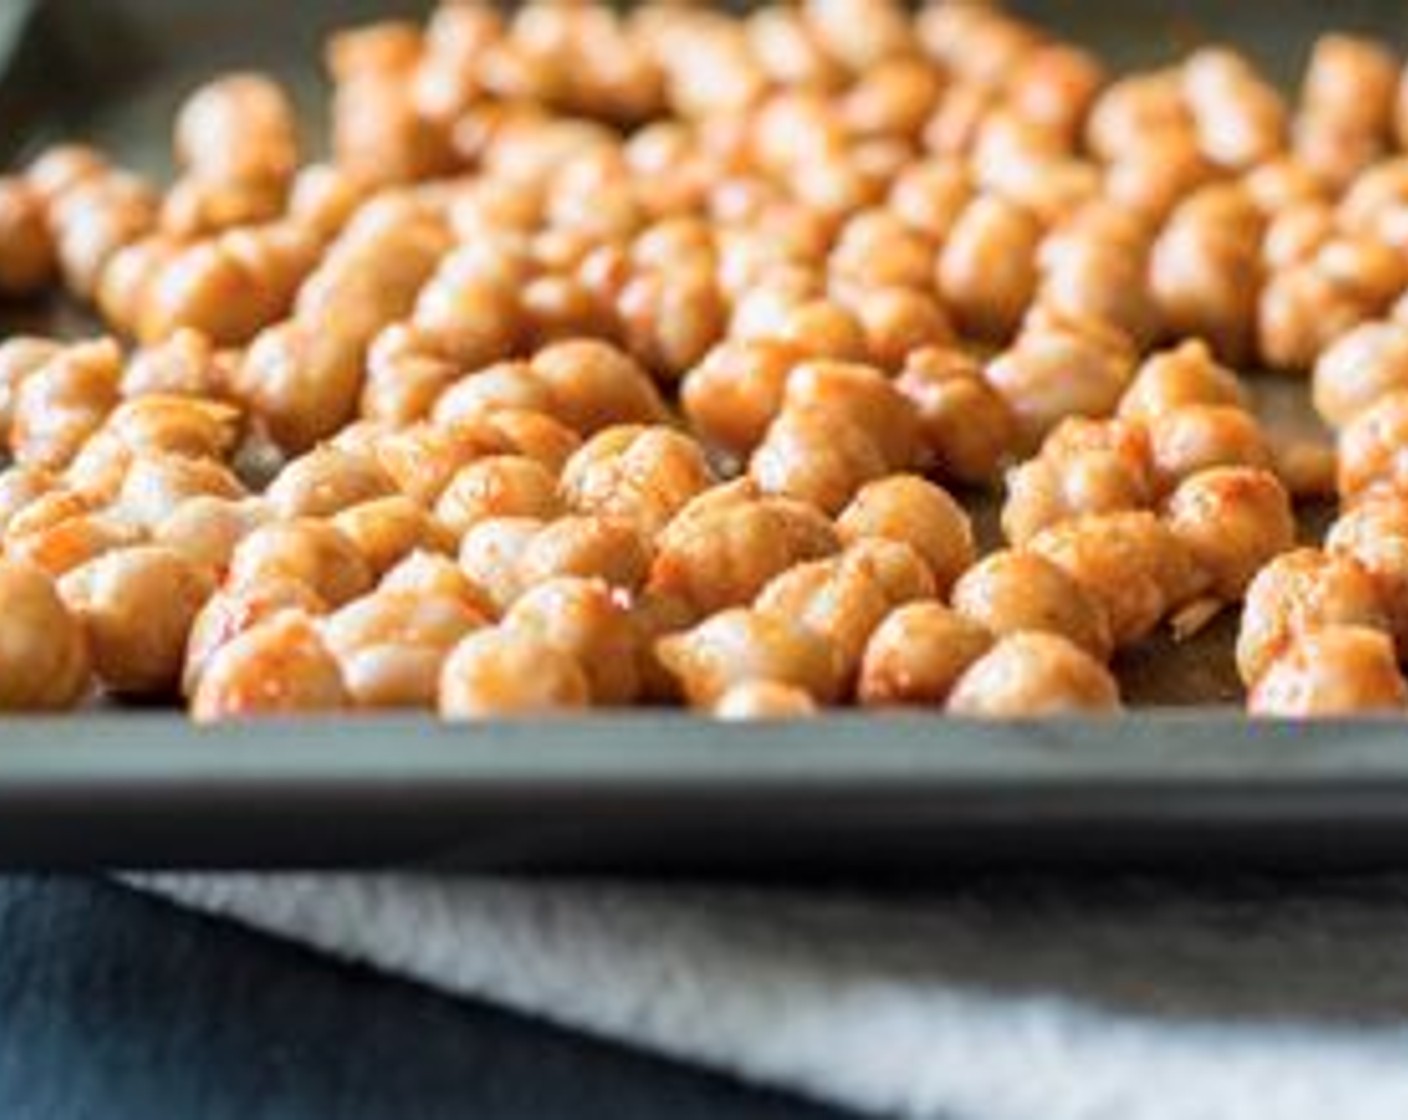 step 4 Add chickpeas to a baking sheet. Drizzle with Coconut Oil (1/2 Tbsp) and toss to coat. Sprinkle seasoning mixture over the oil-covered chickpeas, toss to fully cover, then spread seasoned chickpeas onto a baking sheet in a single layer.